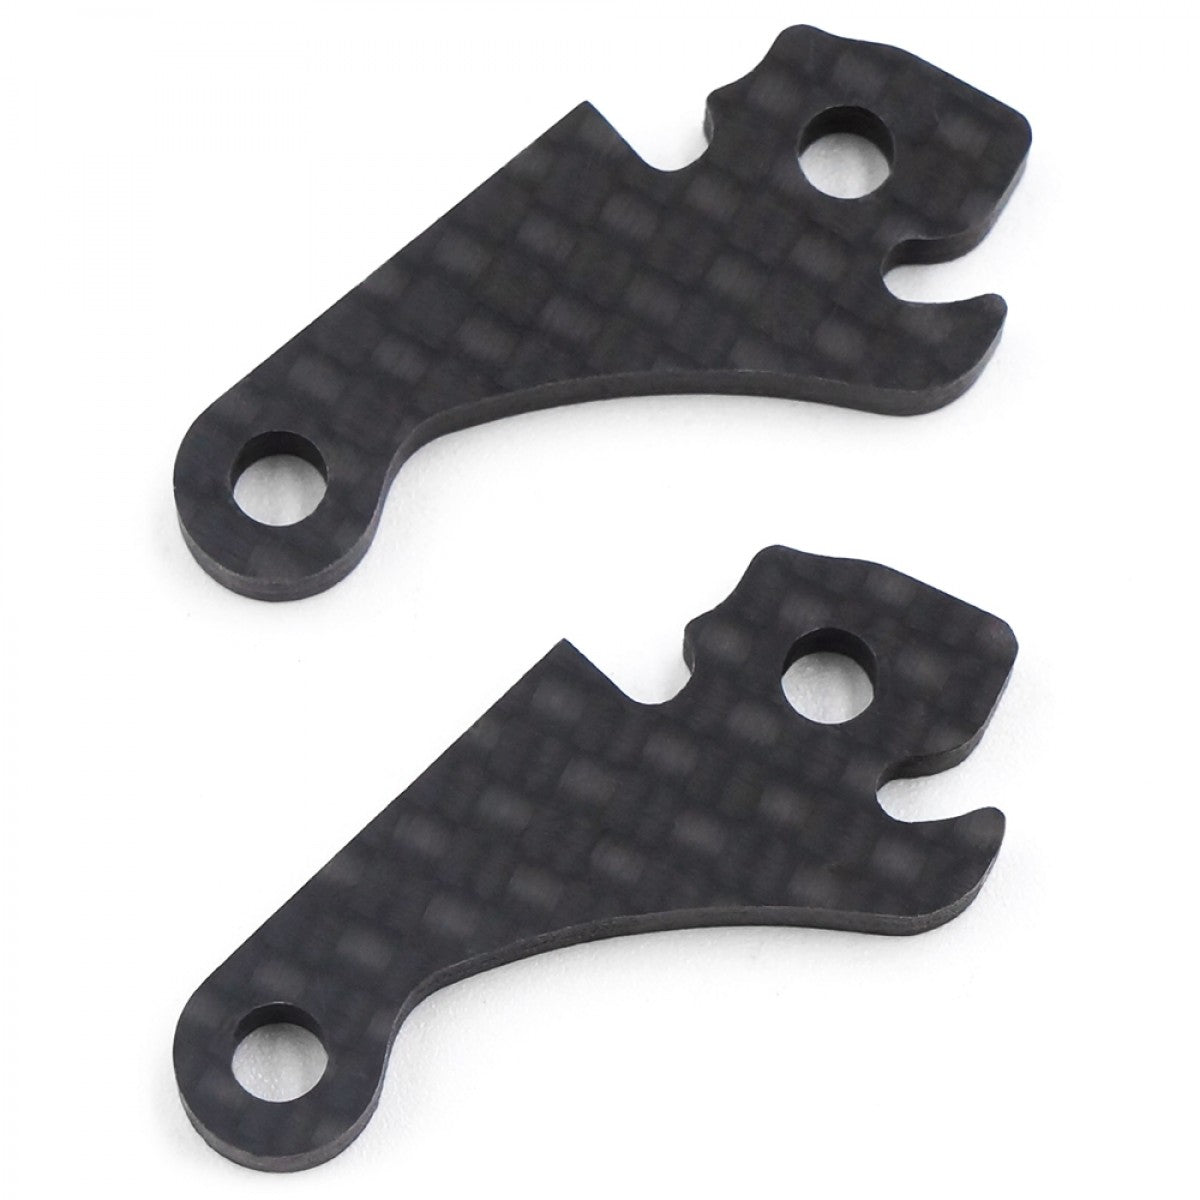 Xpress XP-10222 XQ1 Graphite Option Steering Knuckle Plate